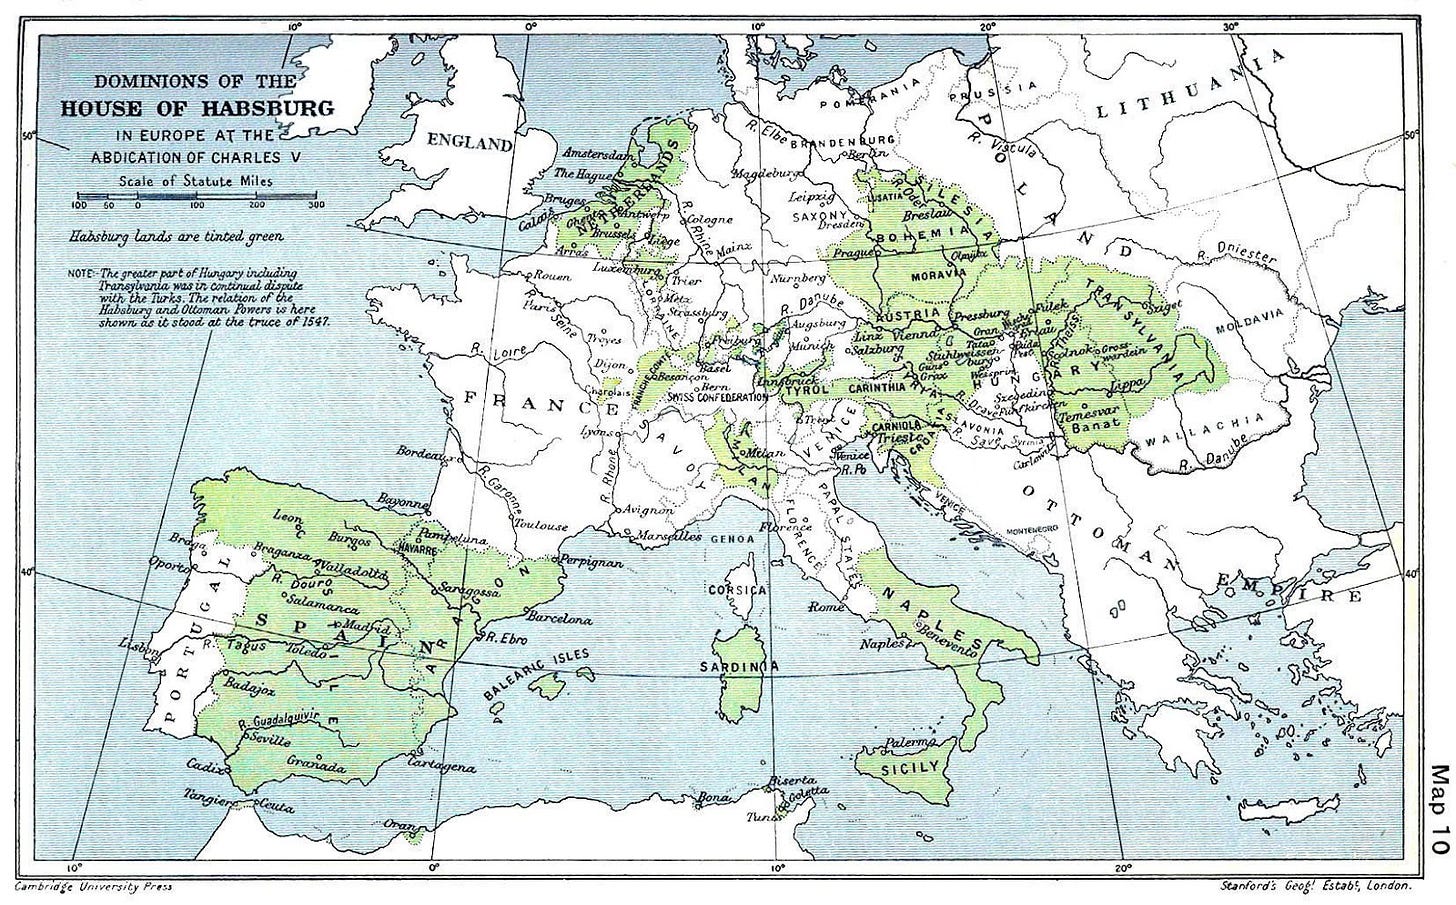 A map of europe with black and green borders

Description automatically generated